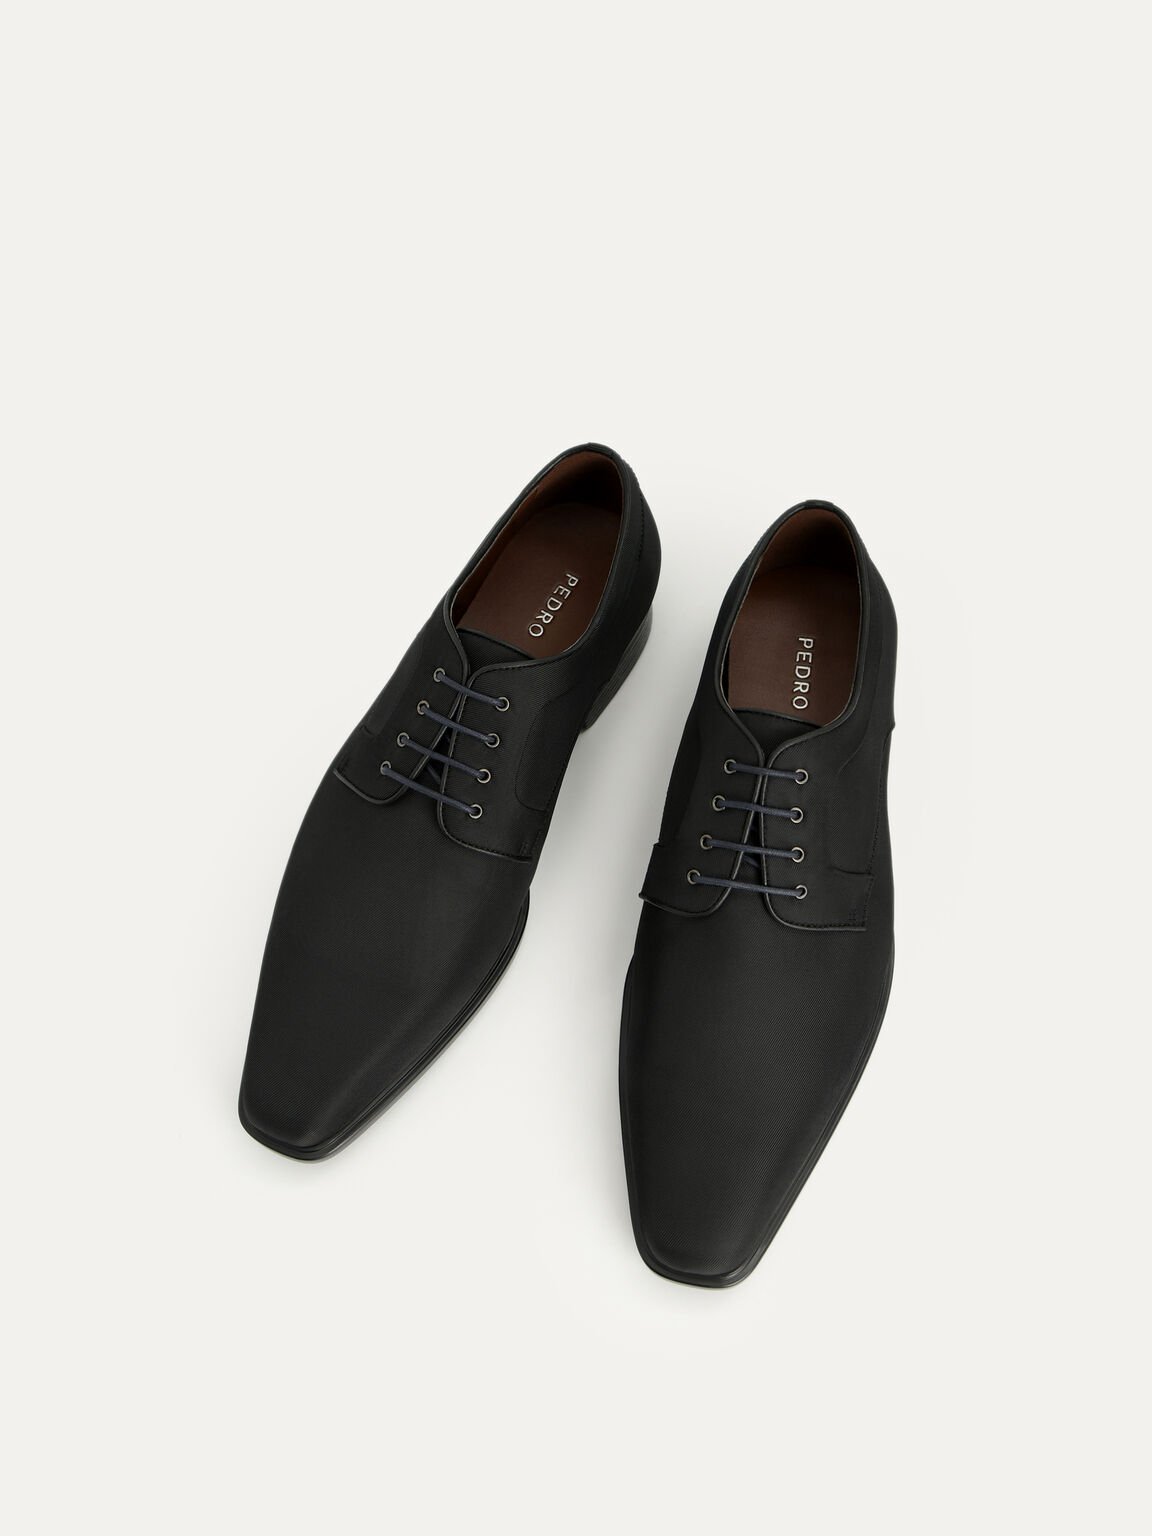 Pointed Square Toe Derby Shoes, Black